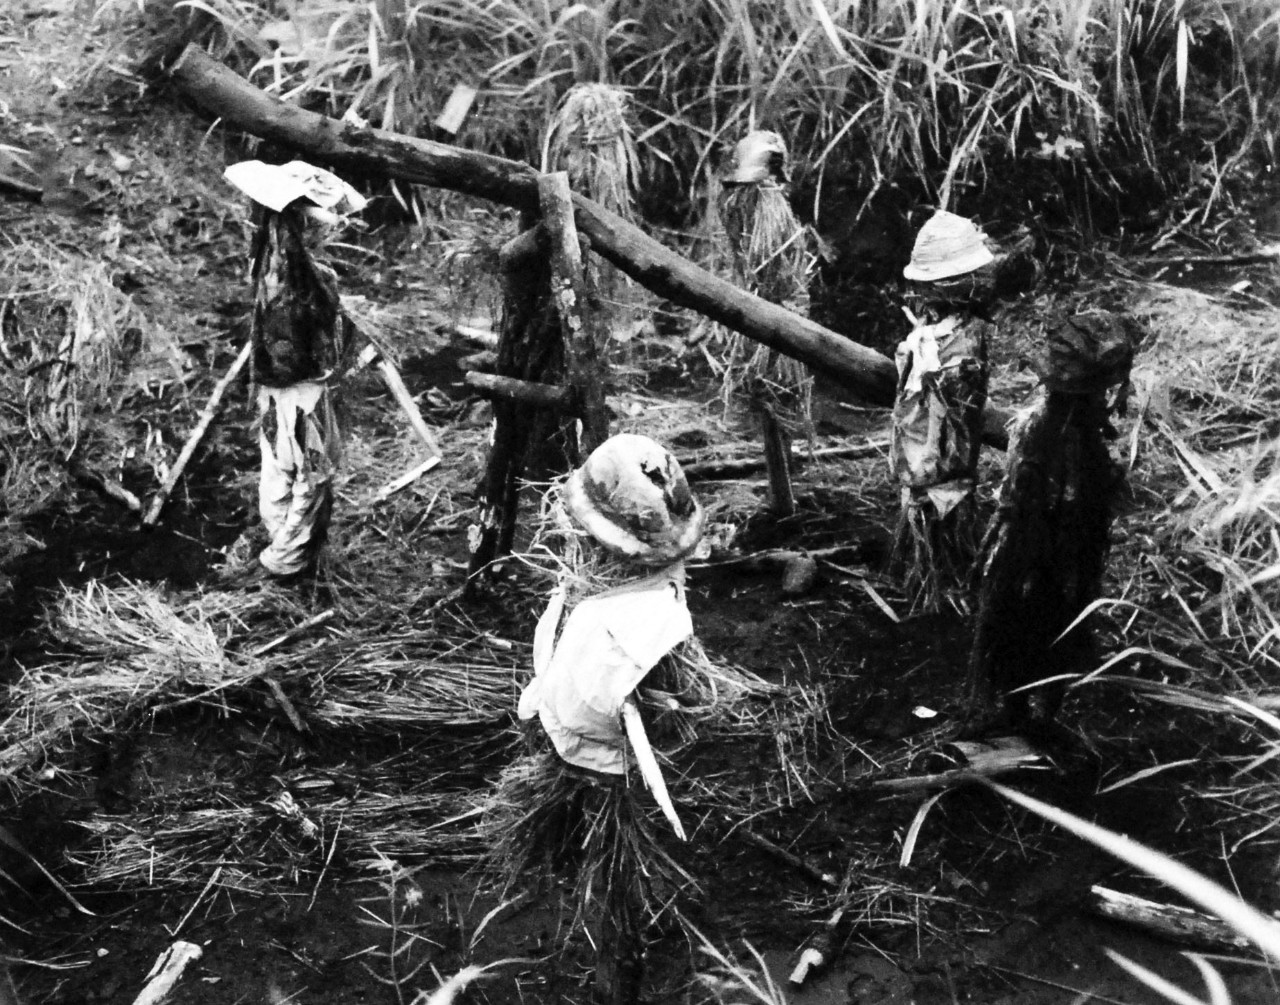 127-GW-970-71518:   Battle of Cape Gloucester, New Britain, December 1943-January 1944.  Dummy Japanese gun crew.   To make Marines think the enemy was strong in one section on Cape Gloucester, the Japanese rigged up this scarecrow gun and crew. Photographed by Howard, 15 January 1944.  Official U.S. Marine Corps Photograph, now in the collections of the National Archives.   (2014/7/9).